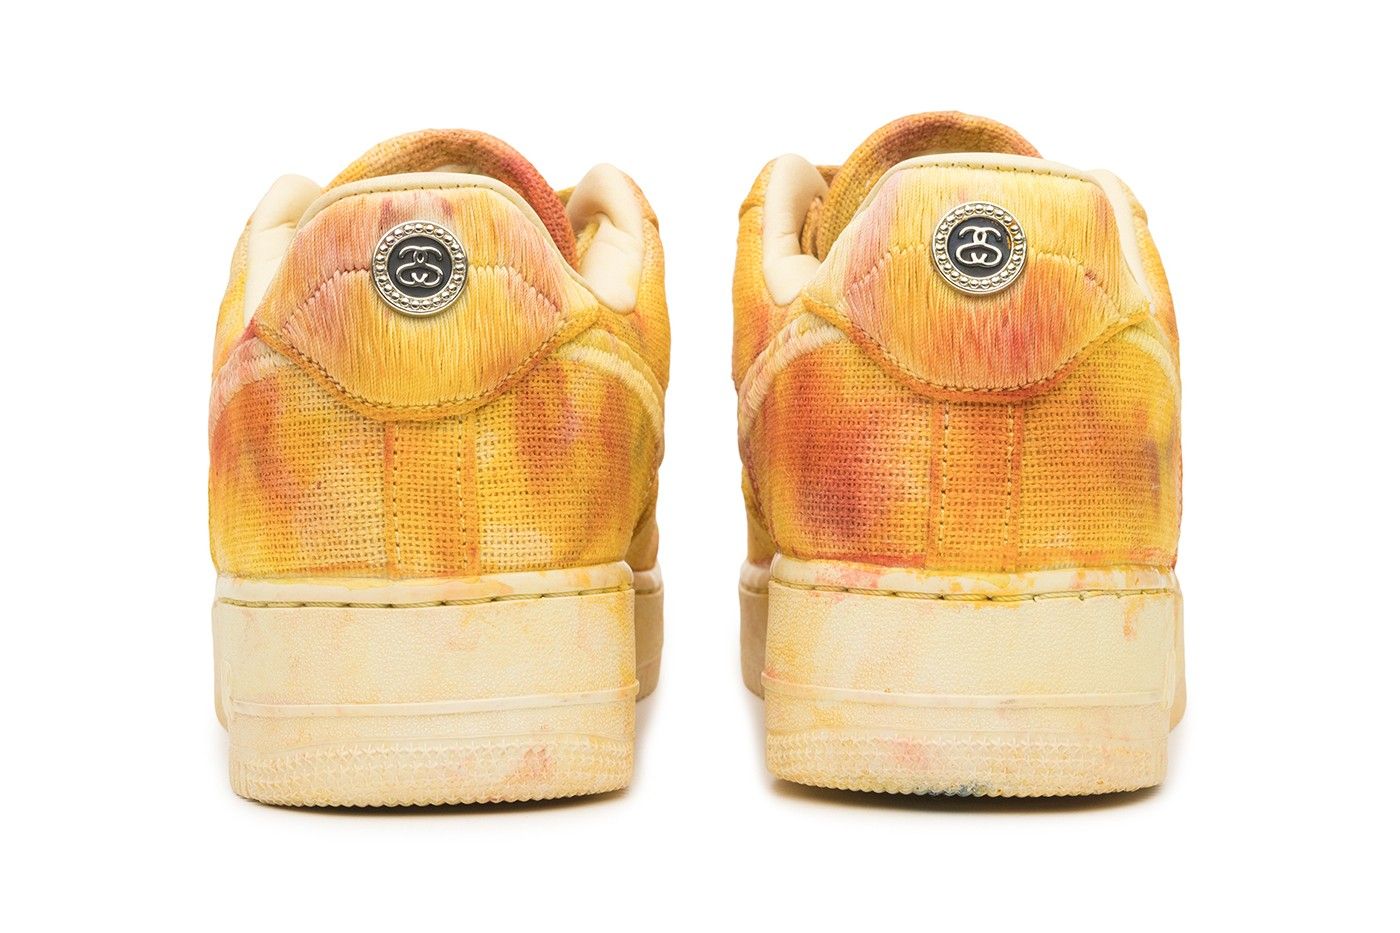 stussy x nike air force 1 low hand dyed